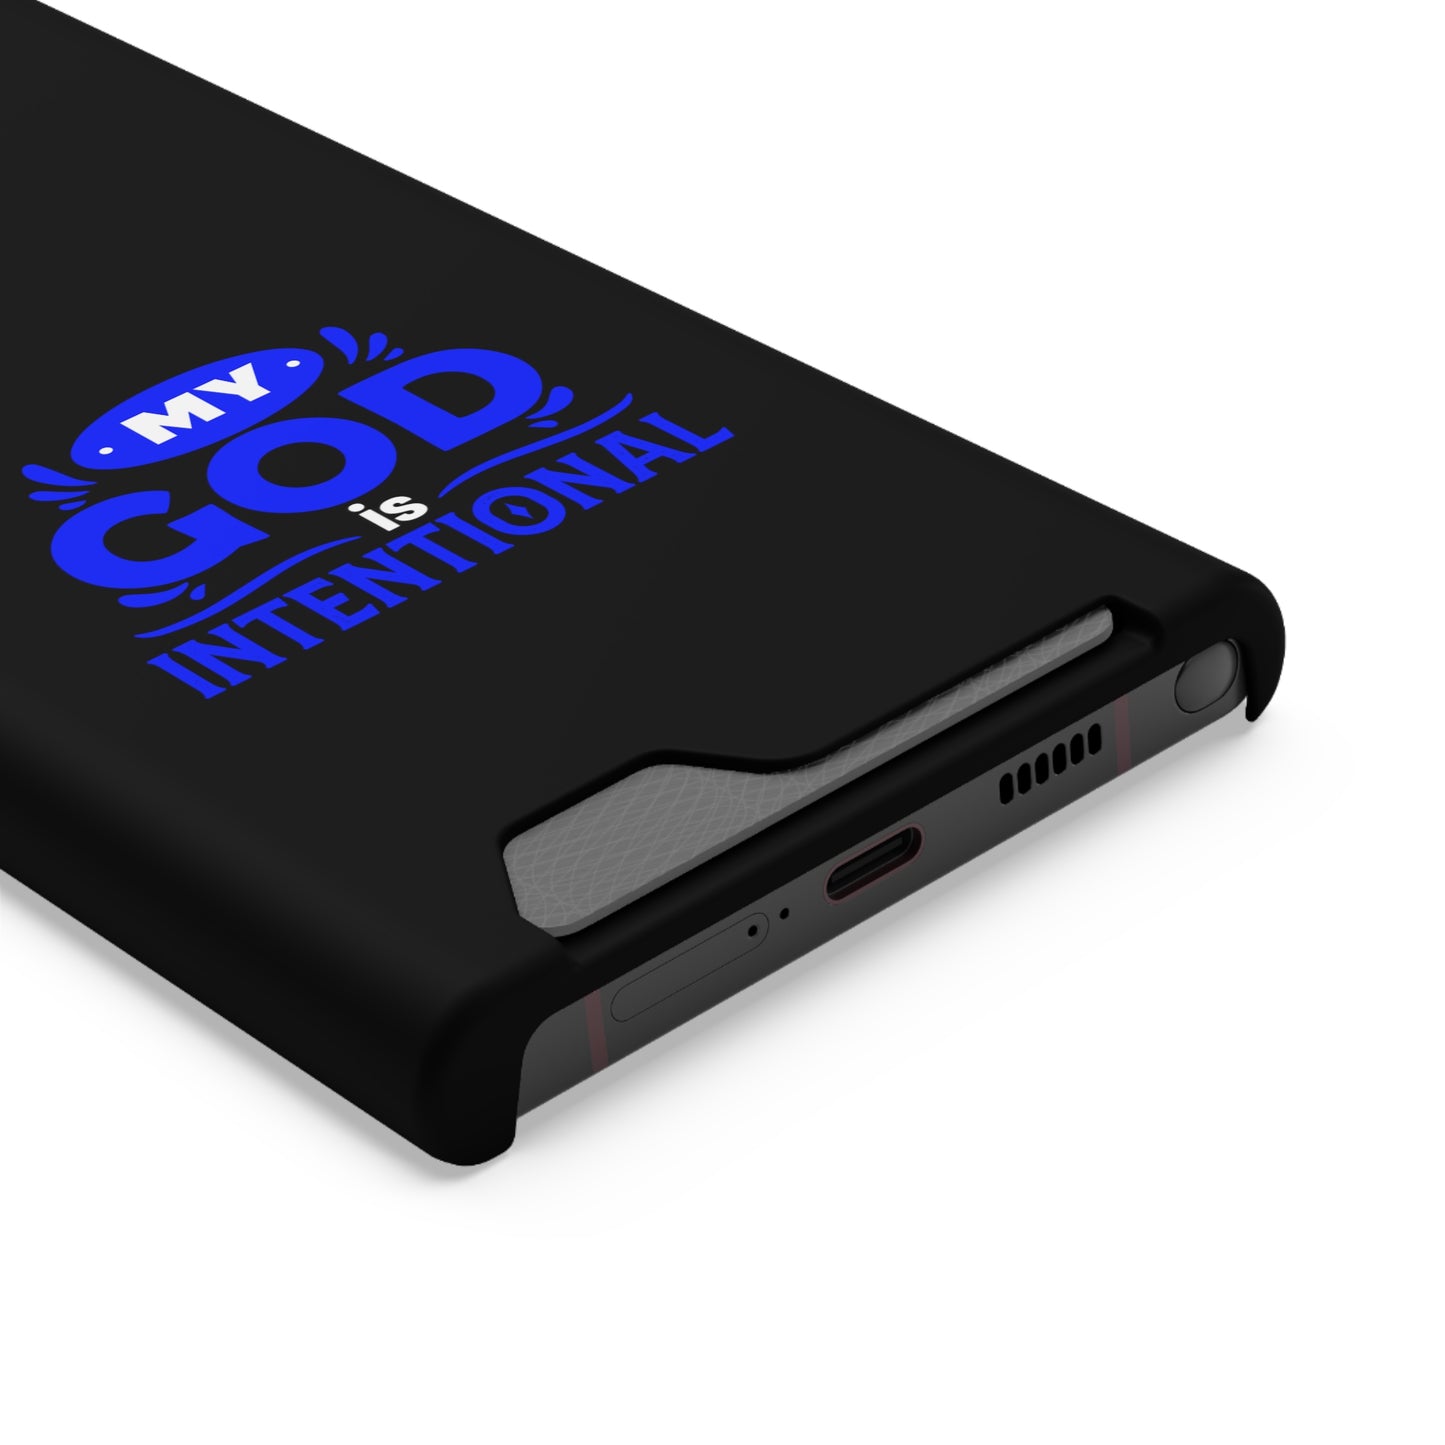 My God Is Intentional  Phone Case With Card Holder